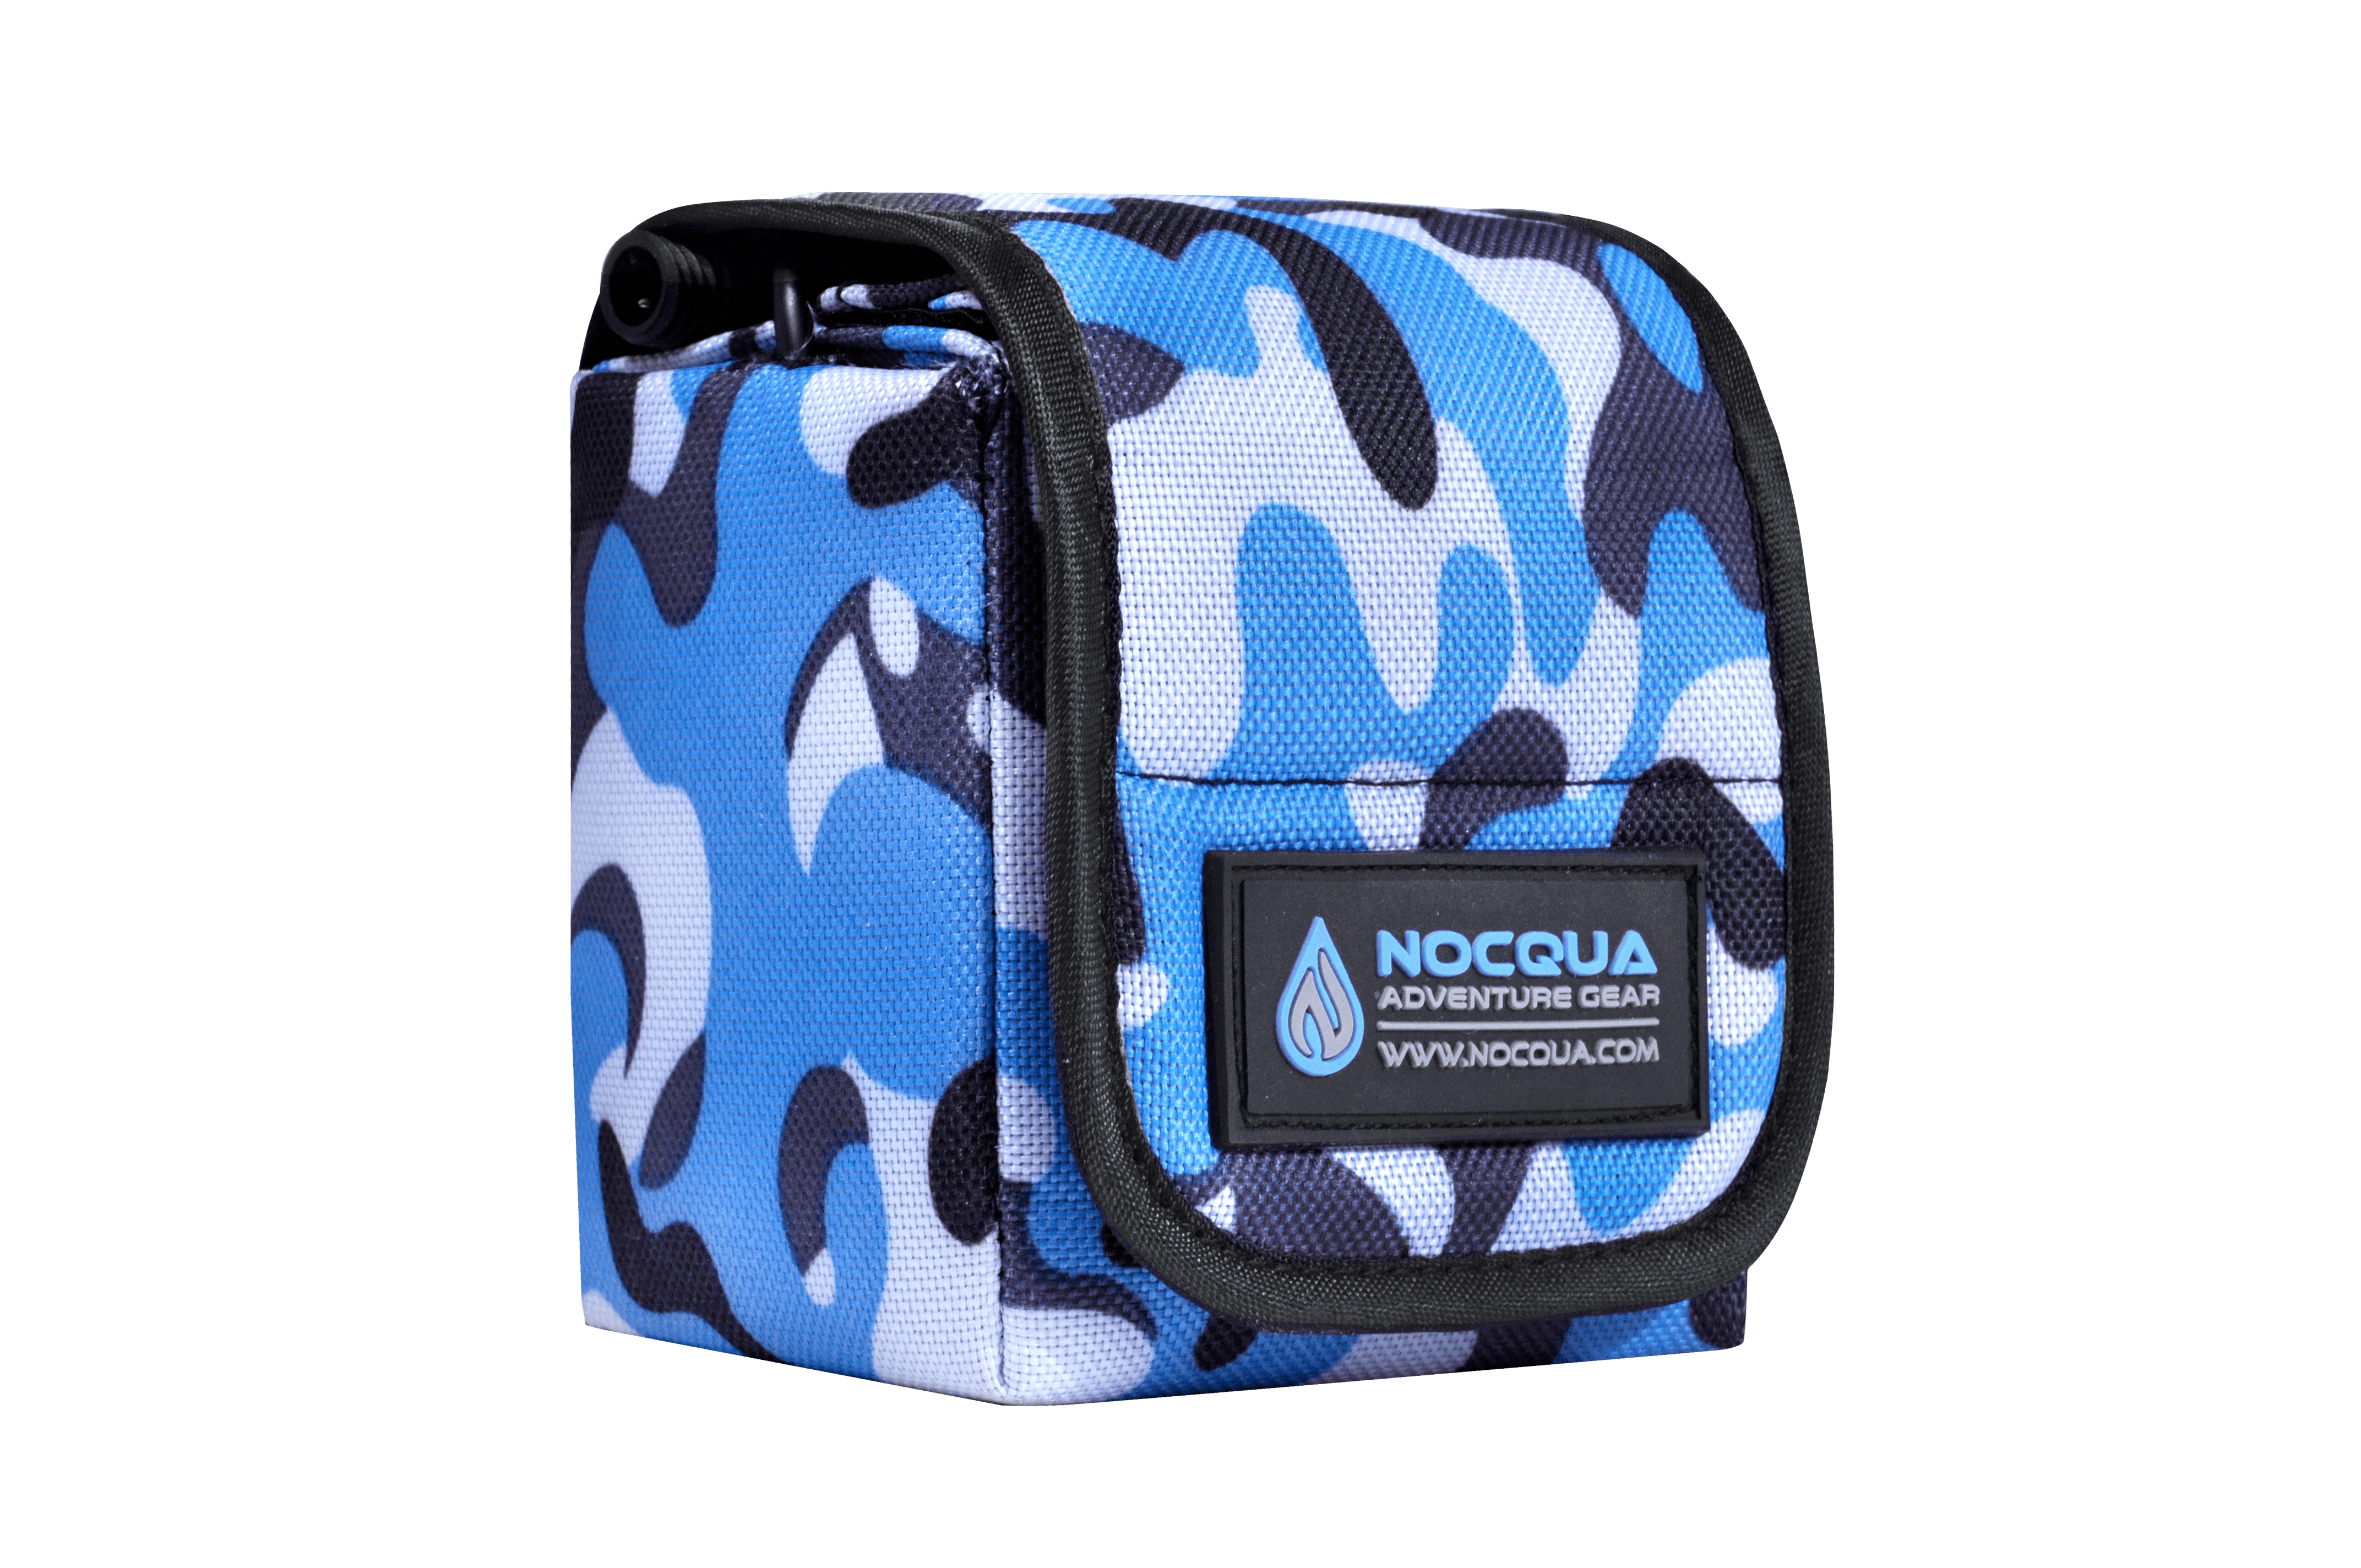  NOCQUA 10Ah Pro Power Water-Resistant Battery and